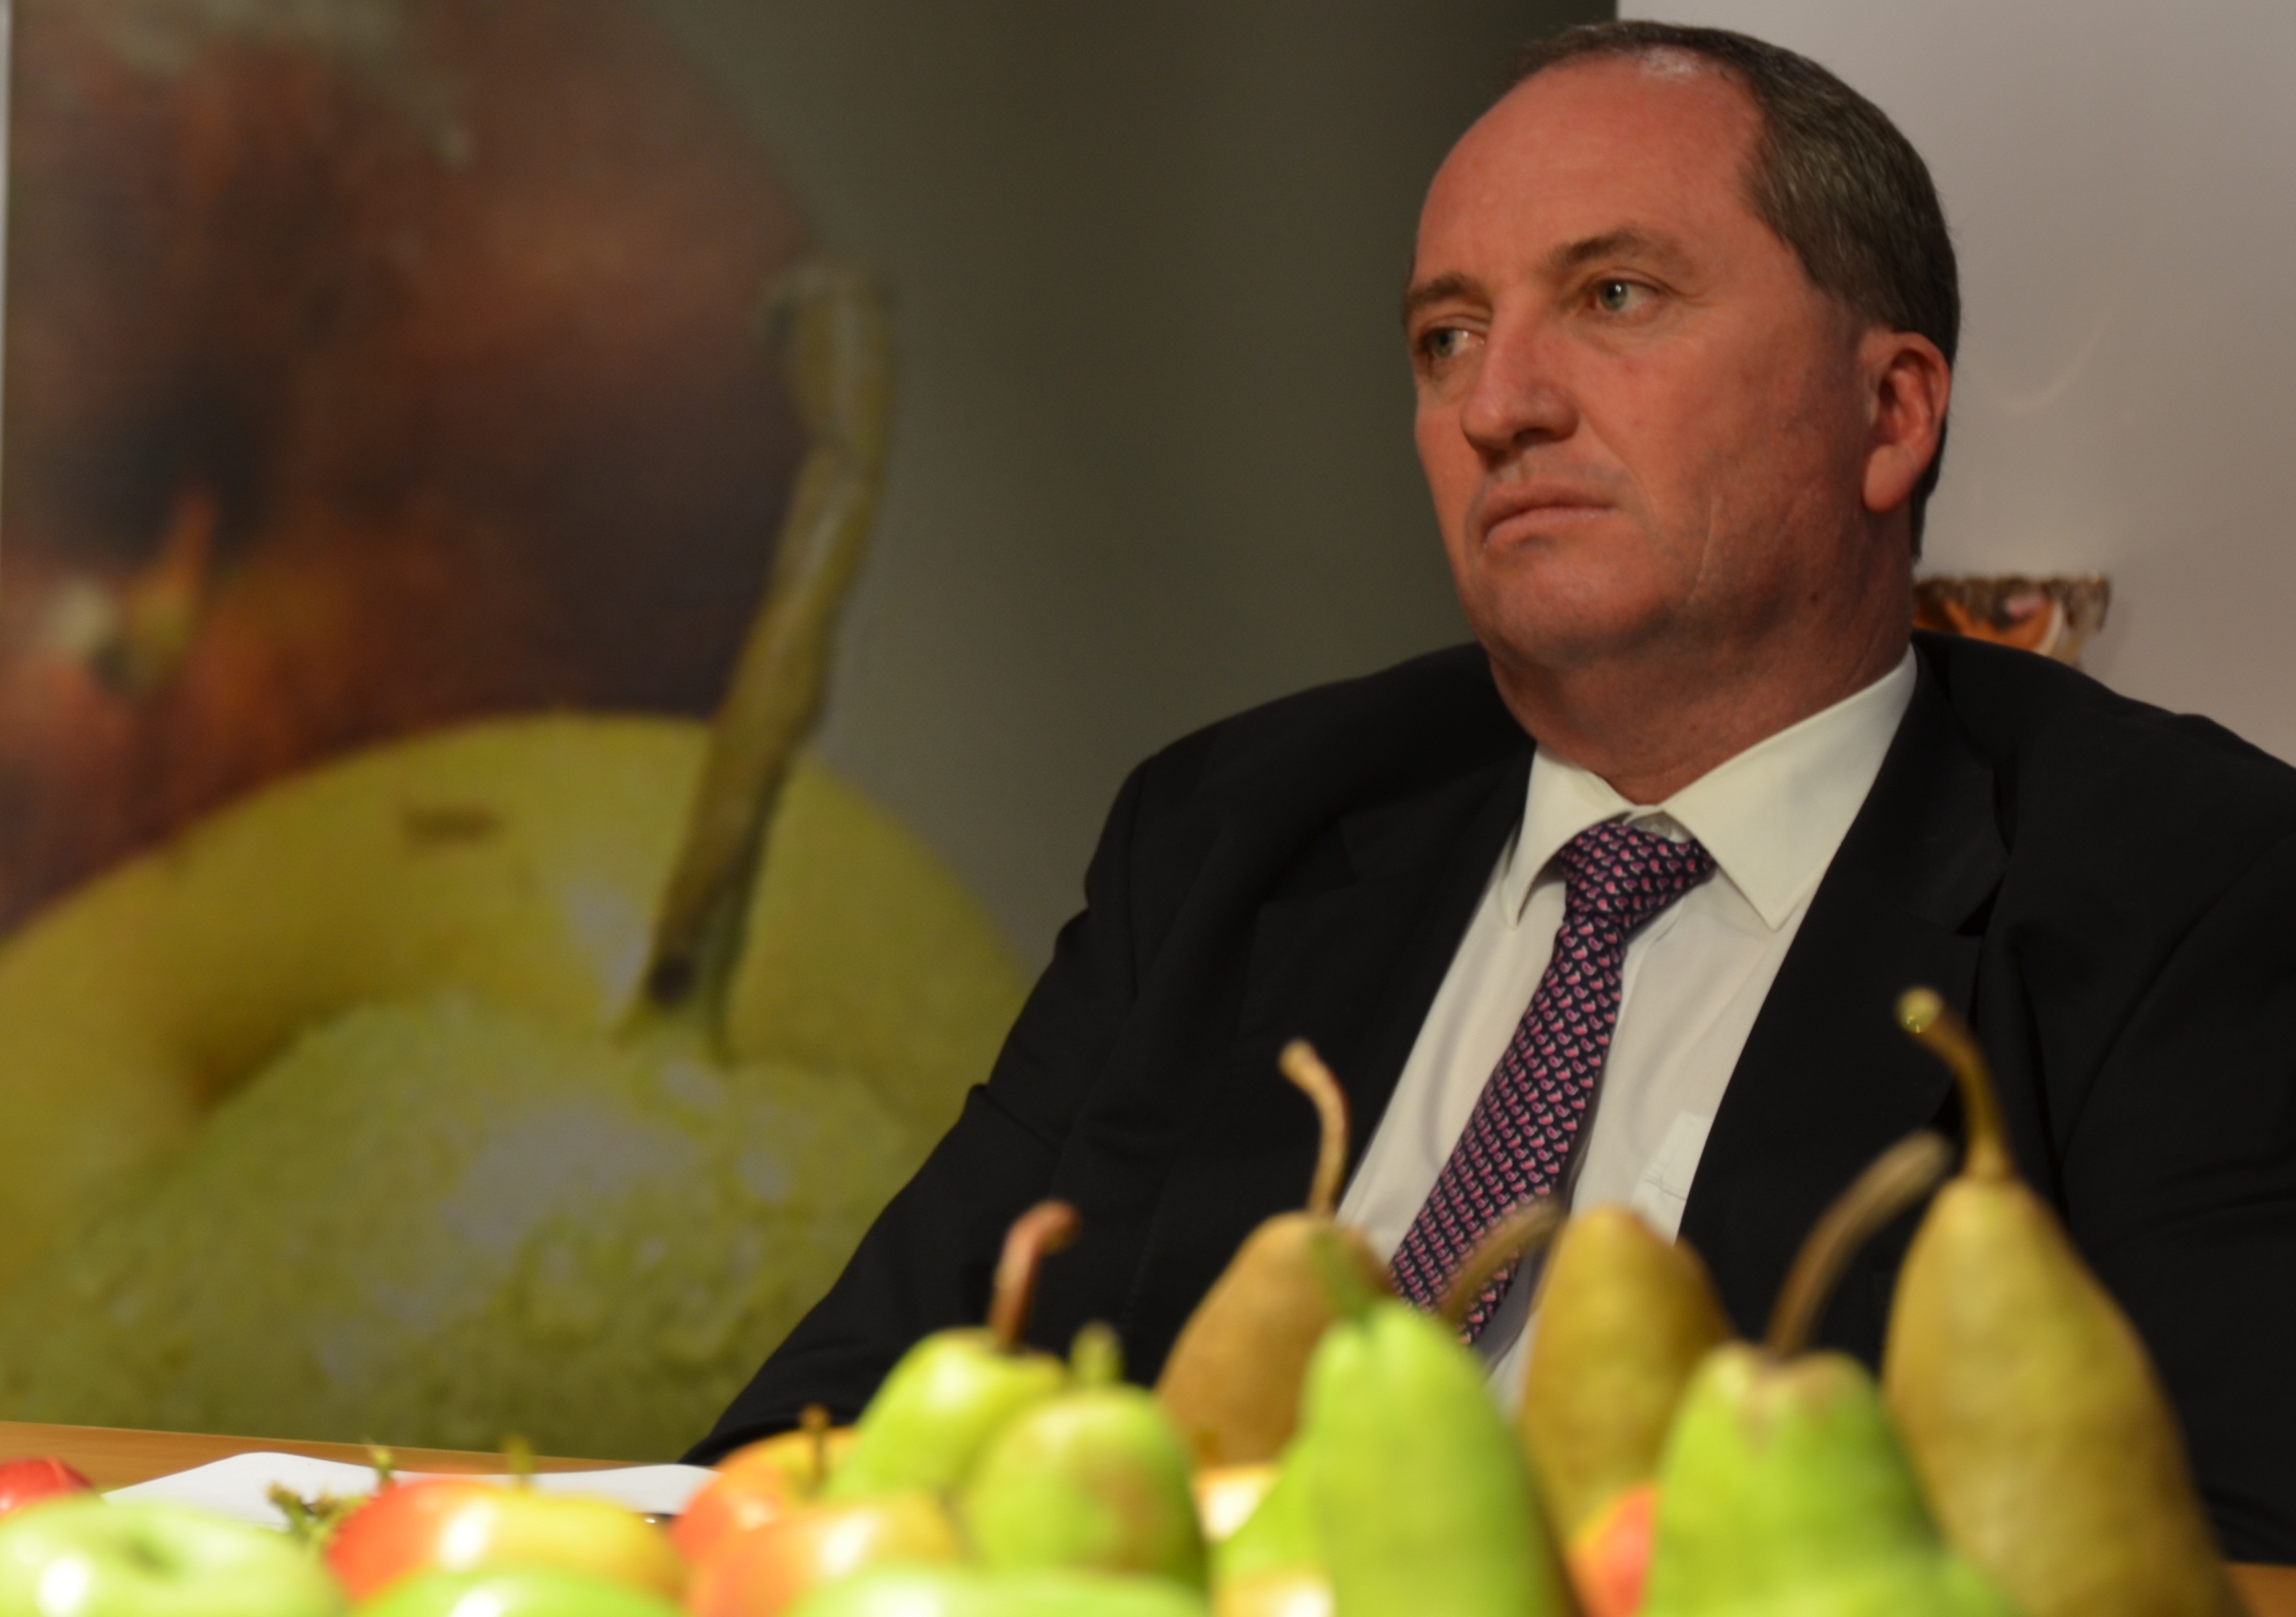 Attention has focused on Barnaby Joyce but he was only one party to the affair. Photo: Flickr cc